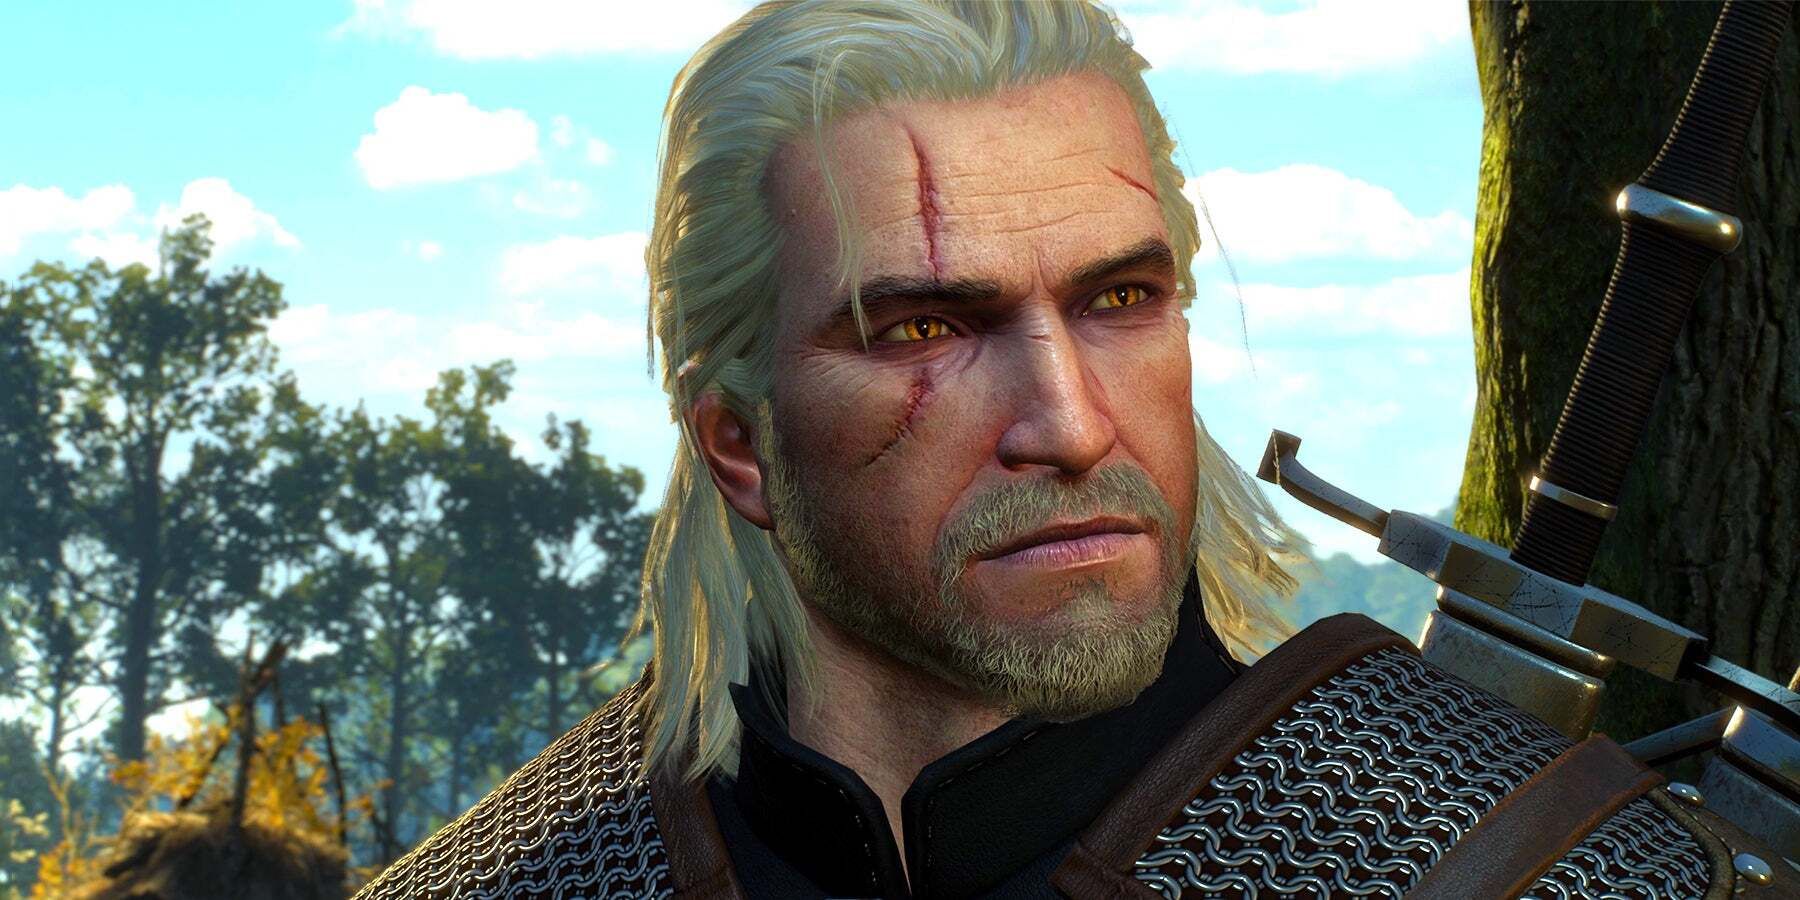 witcher 3 patch